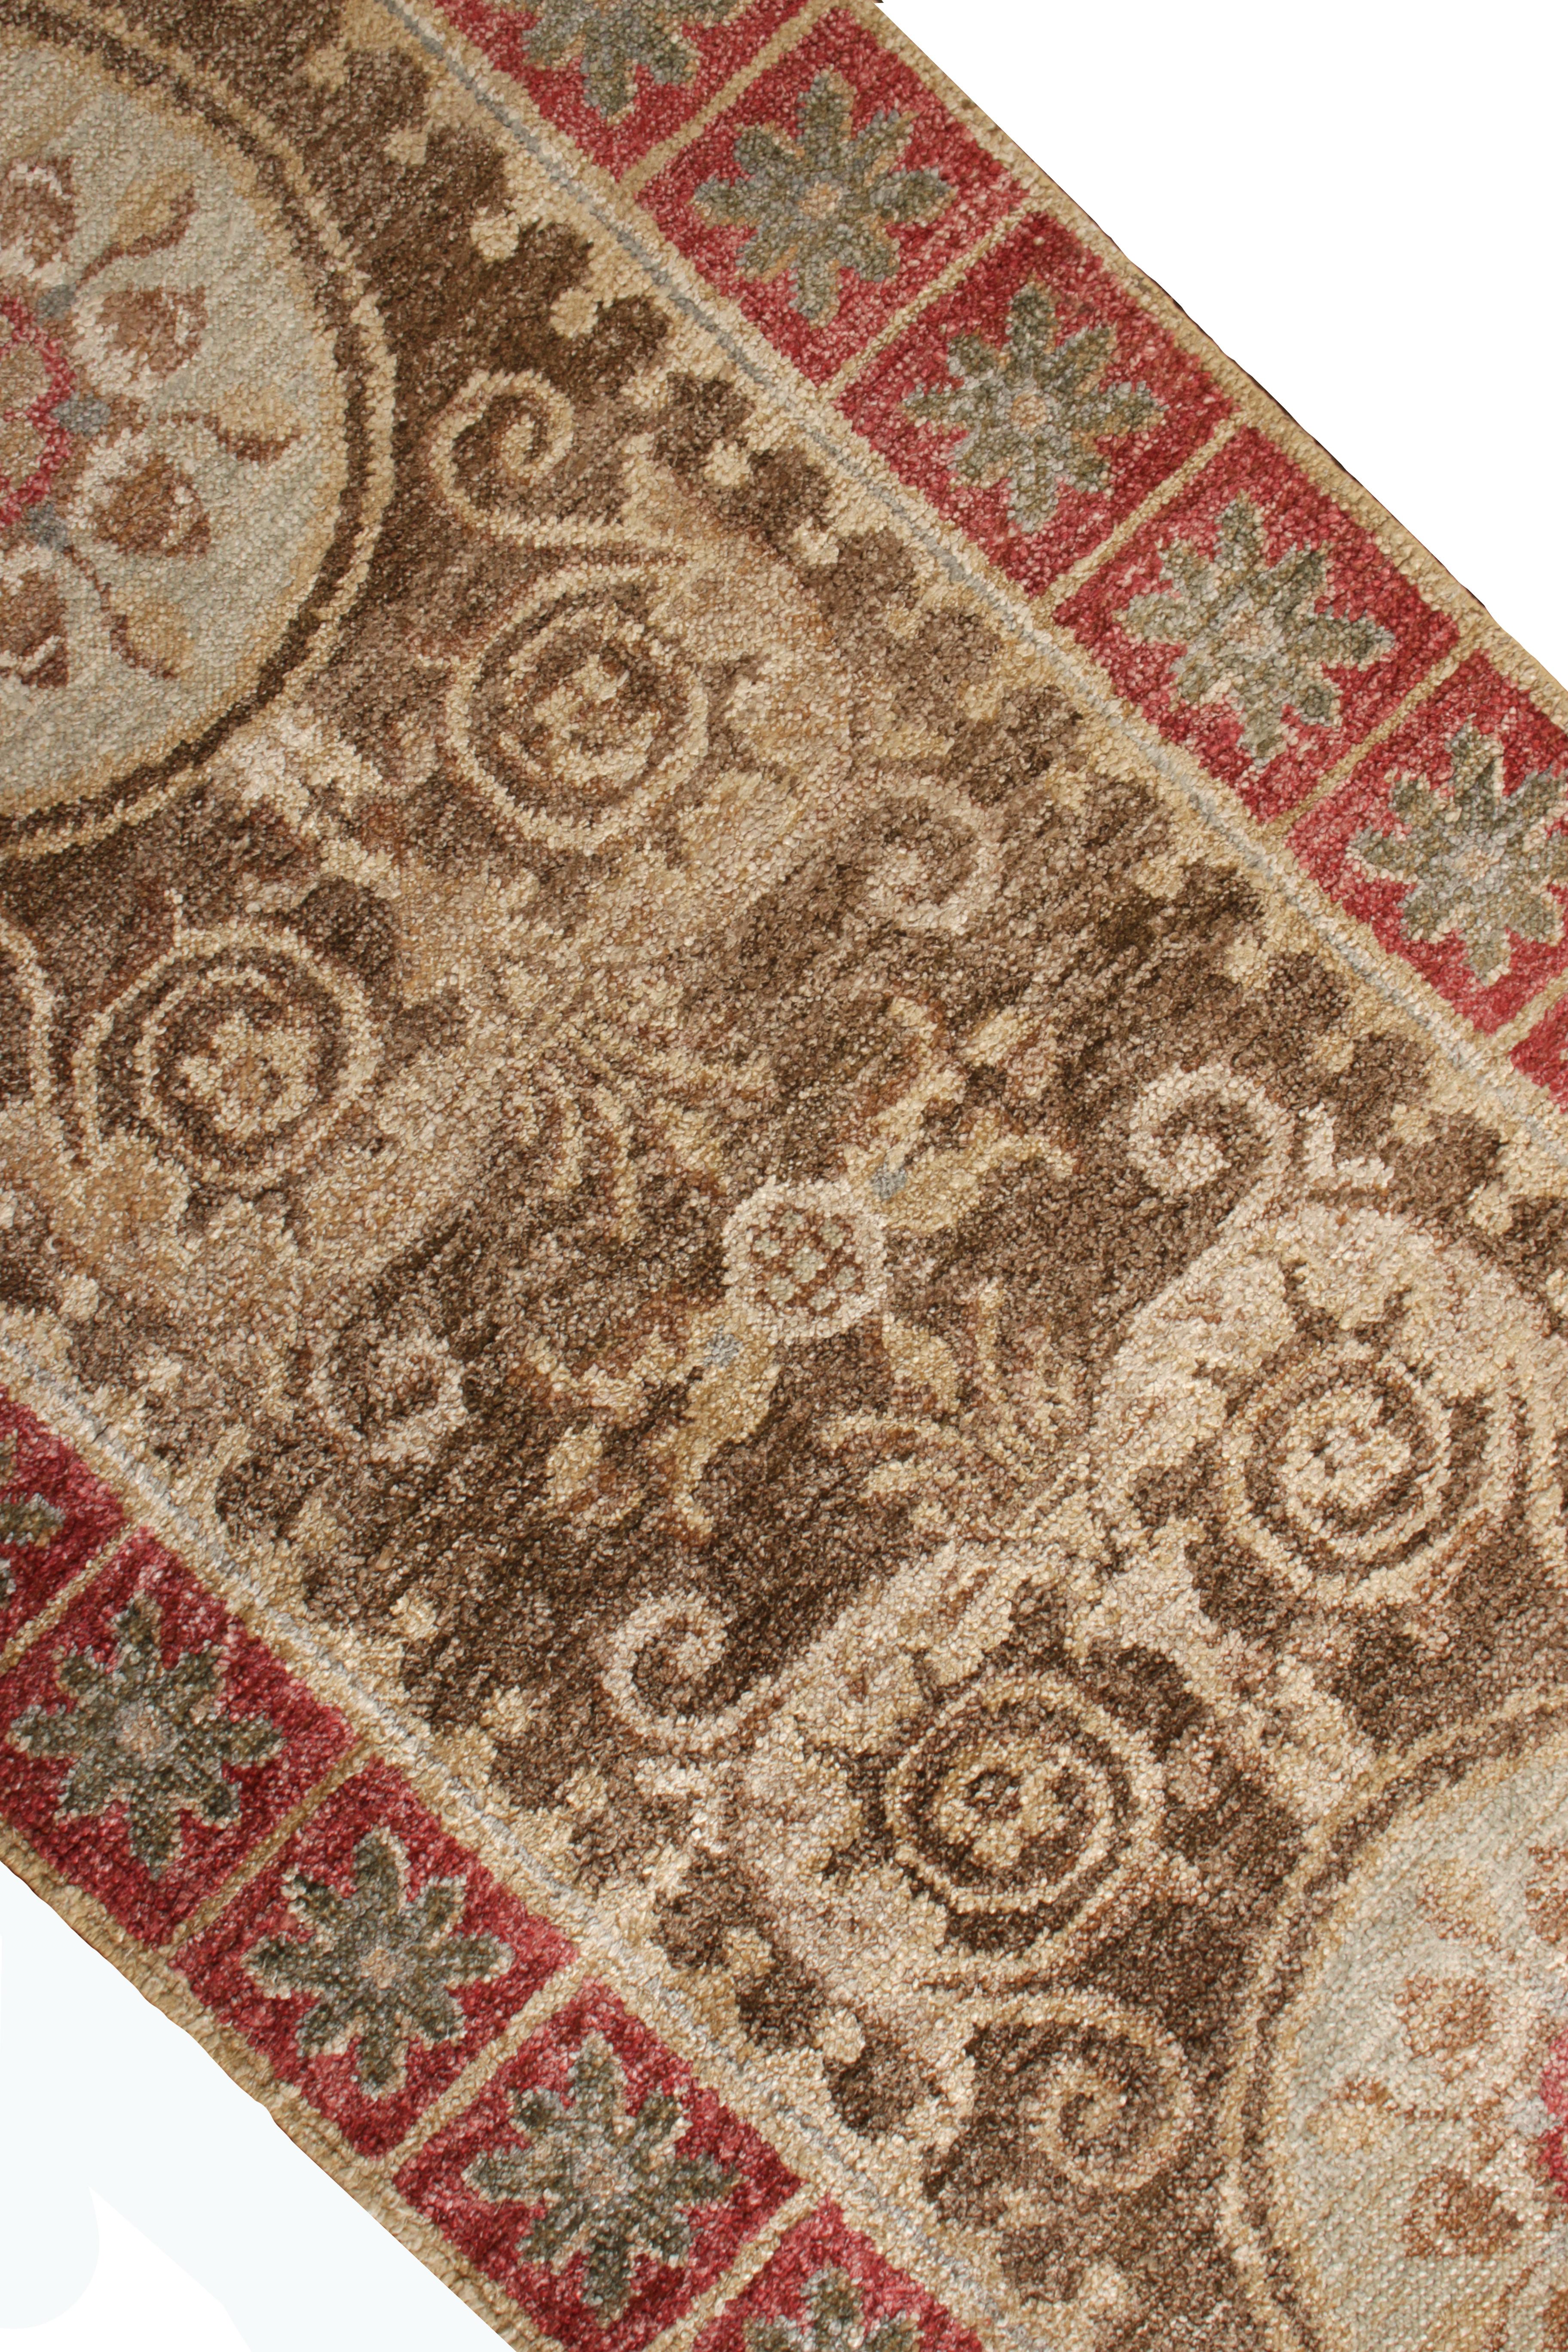 Modern Rug & Kilim’s Transitional Style Rug in Beige-Brown and Red Medallion Pattern For Sale